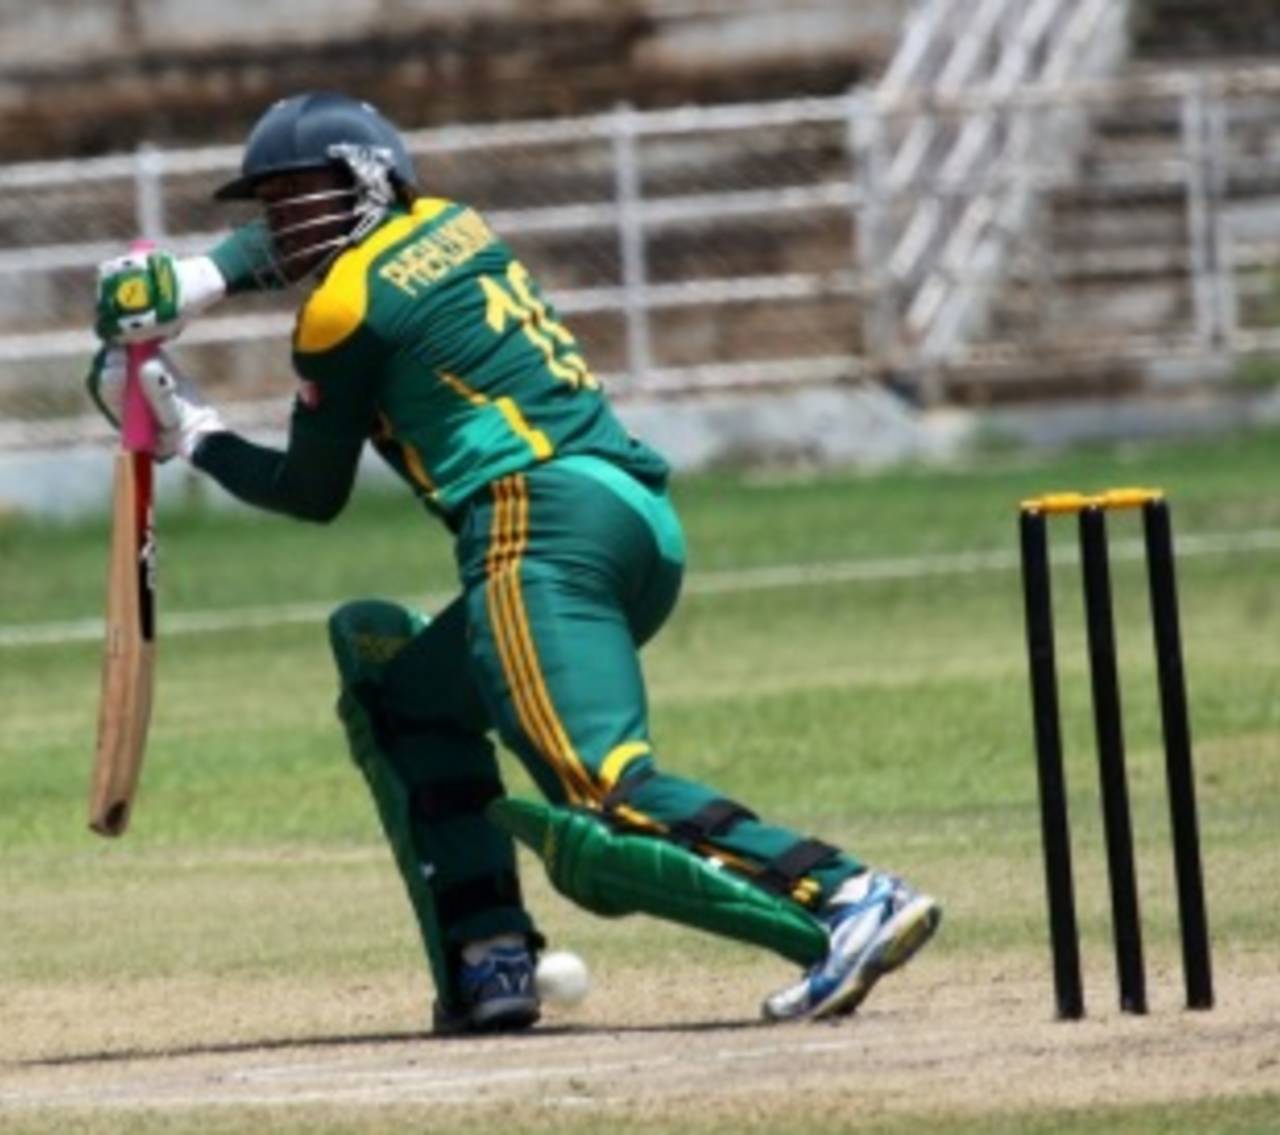 No. 11 Andile Phehlukwayo put on 60 runs for the final wicket with Justin Dill&nbsp;&nbsp;&bull;&nbsp;&nbsp;BCCI